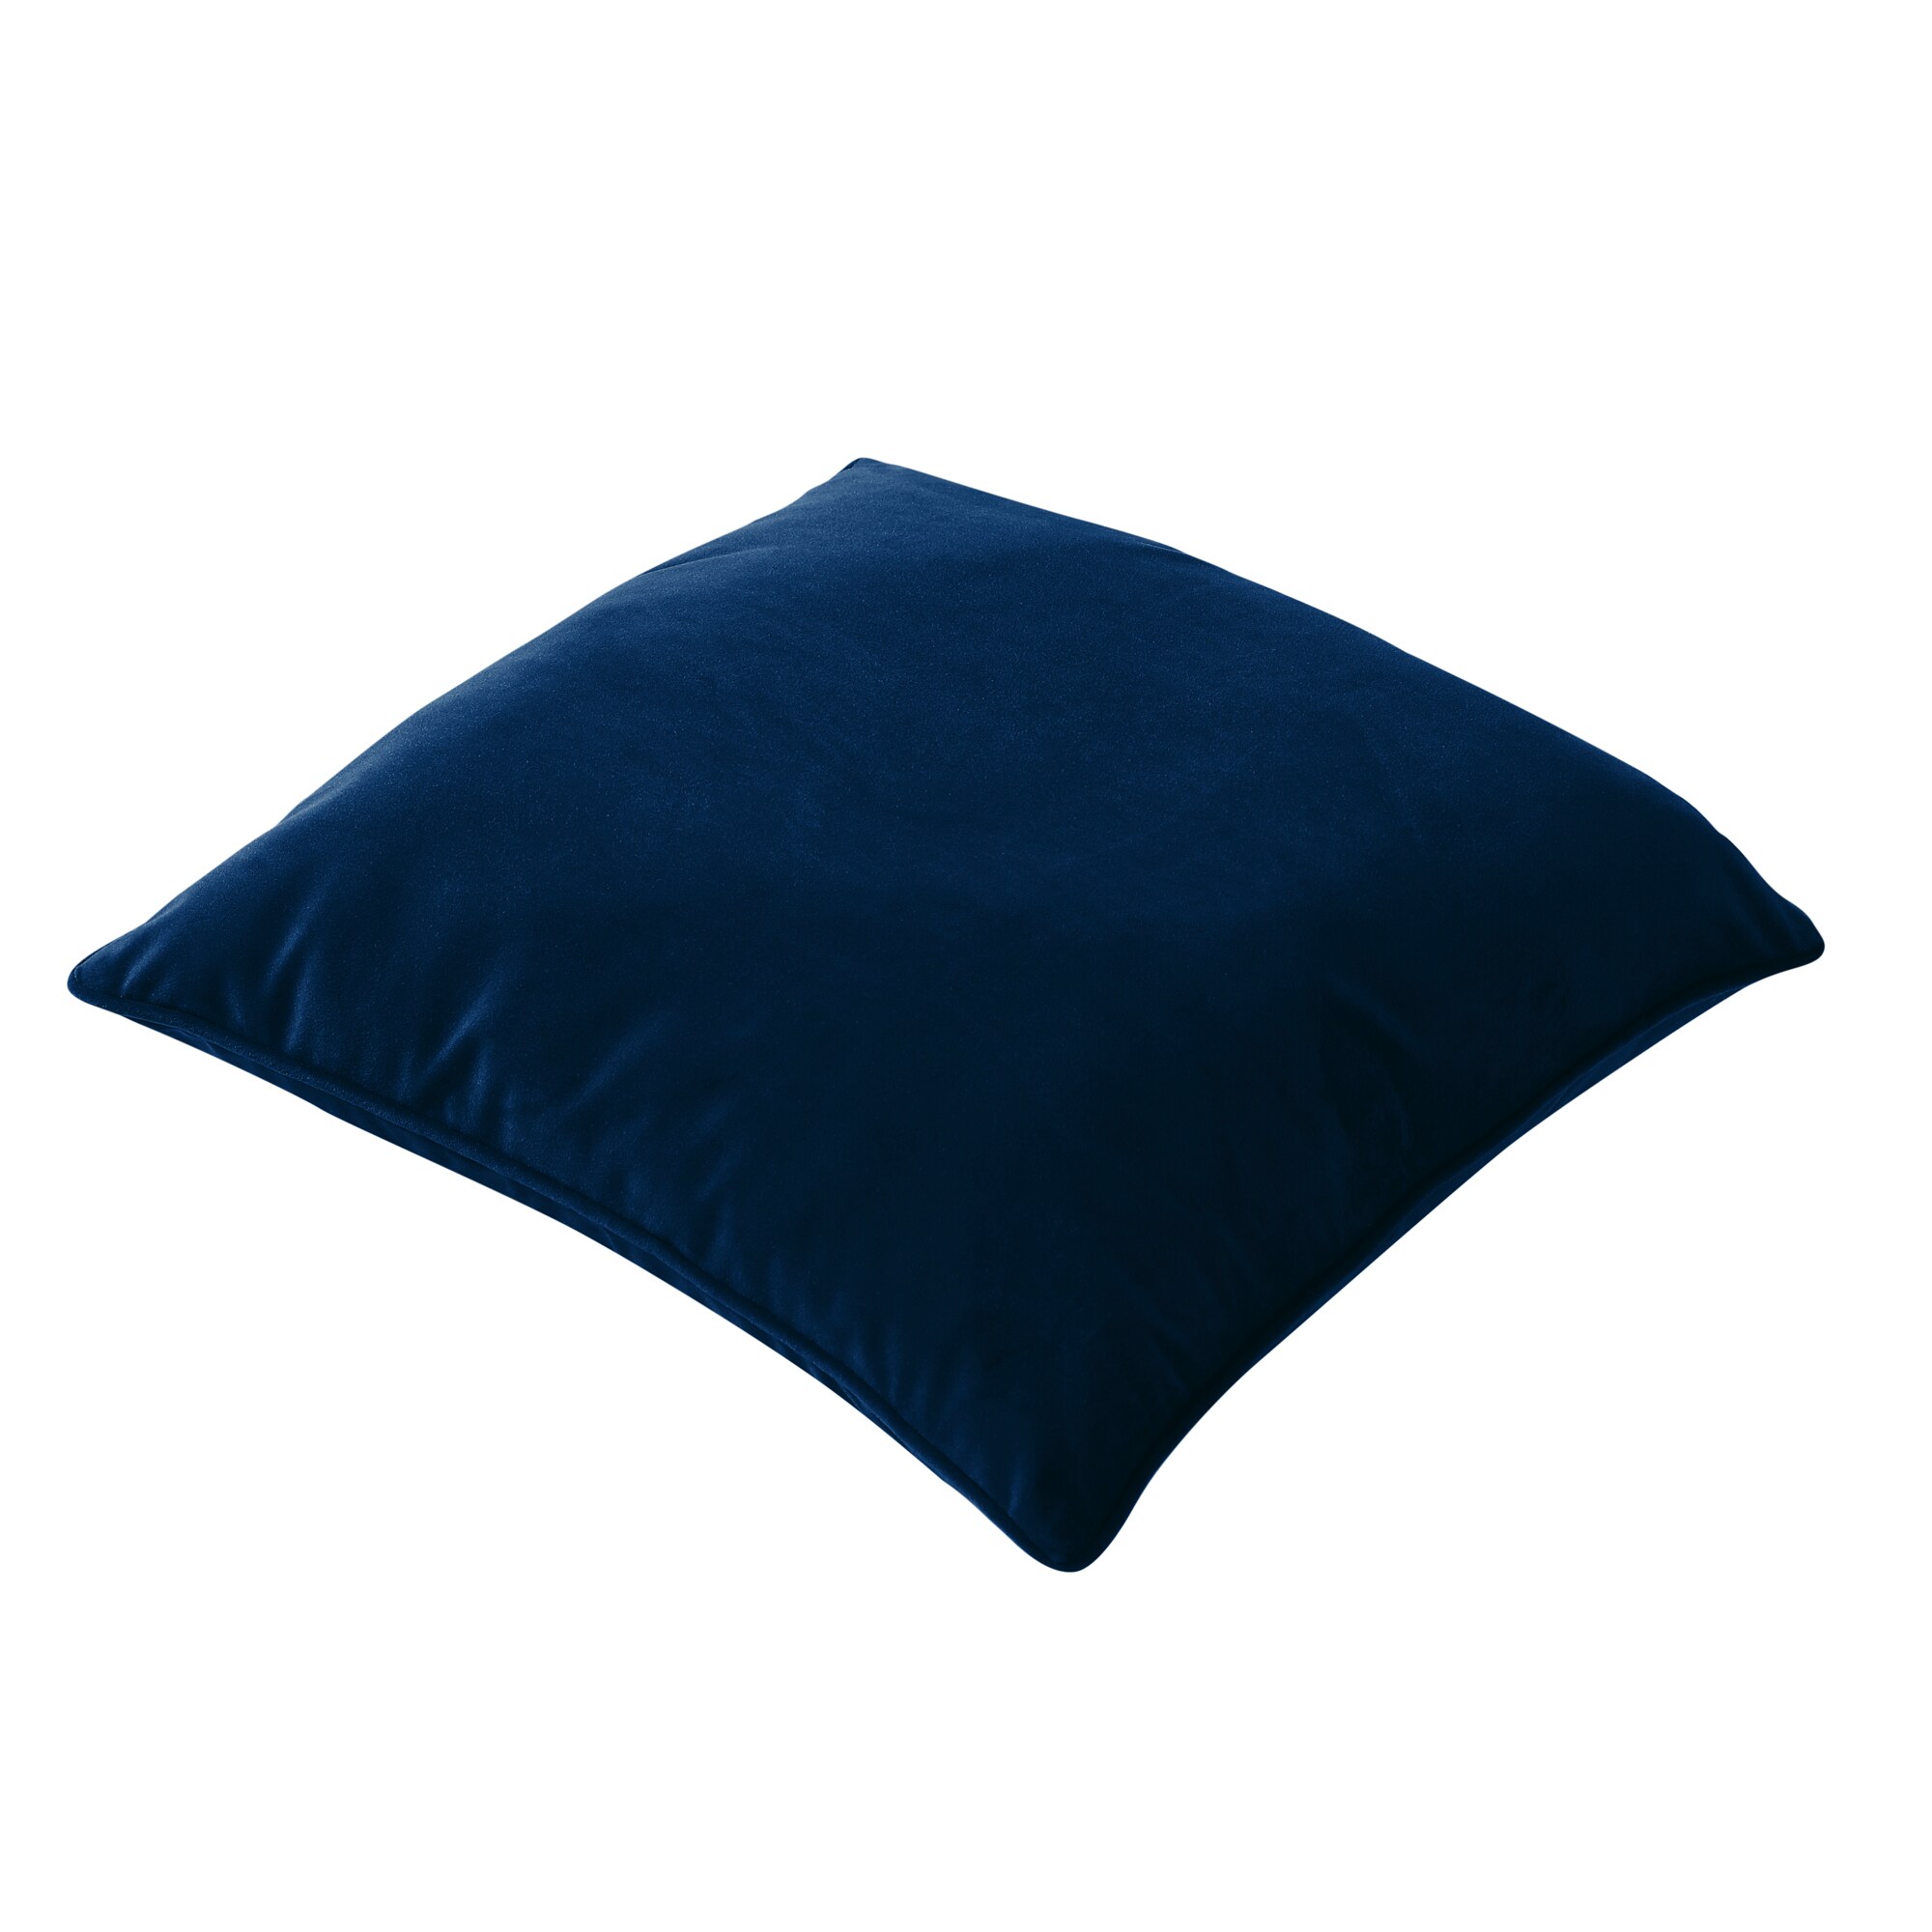 Brielle Home Soft Velvet Square Navy 18 in. x 18 in. Throw Pillow, Blue